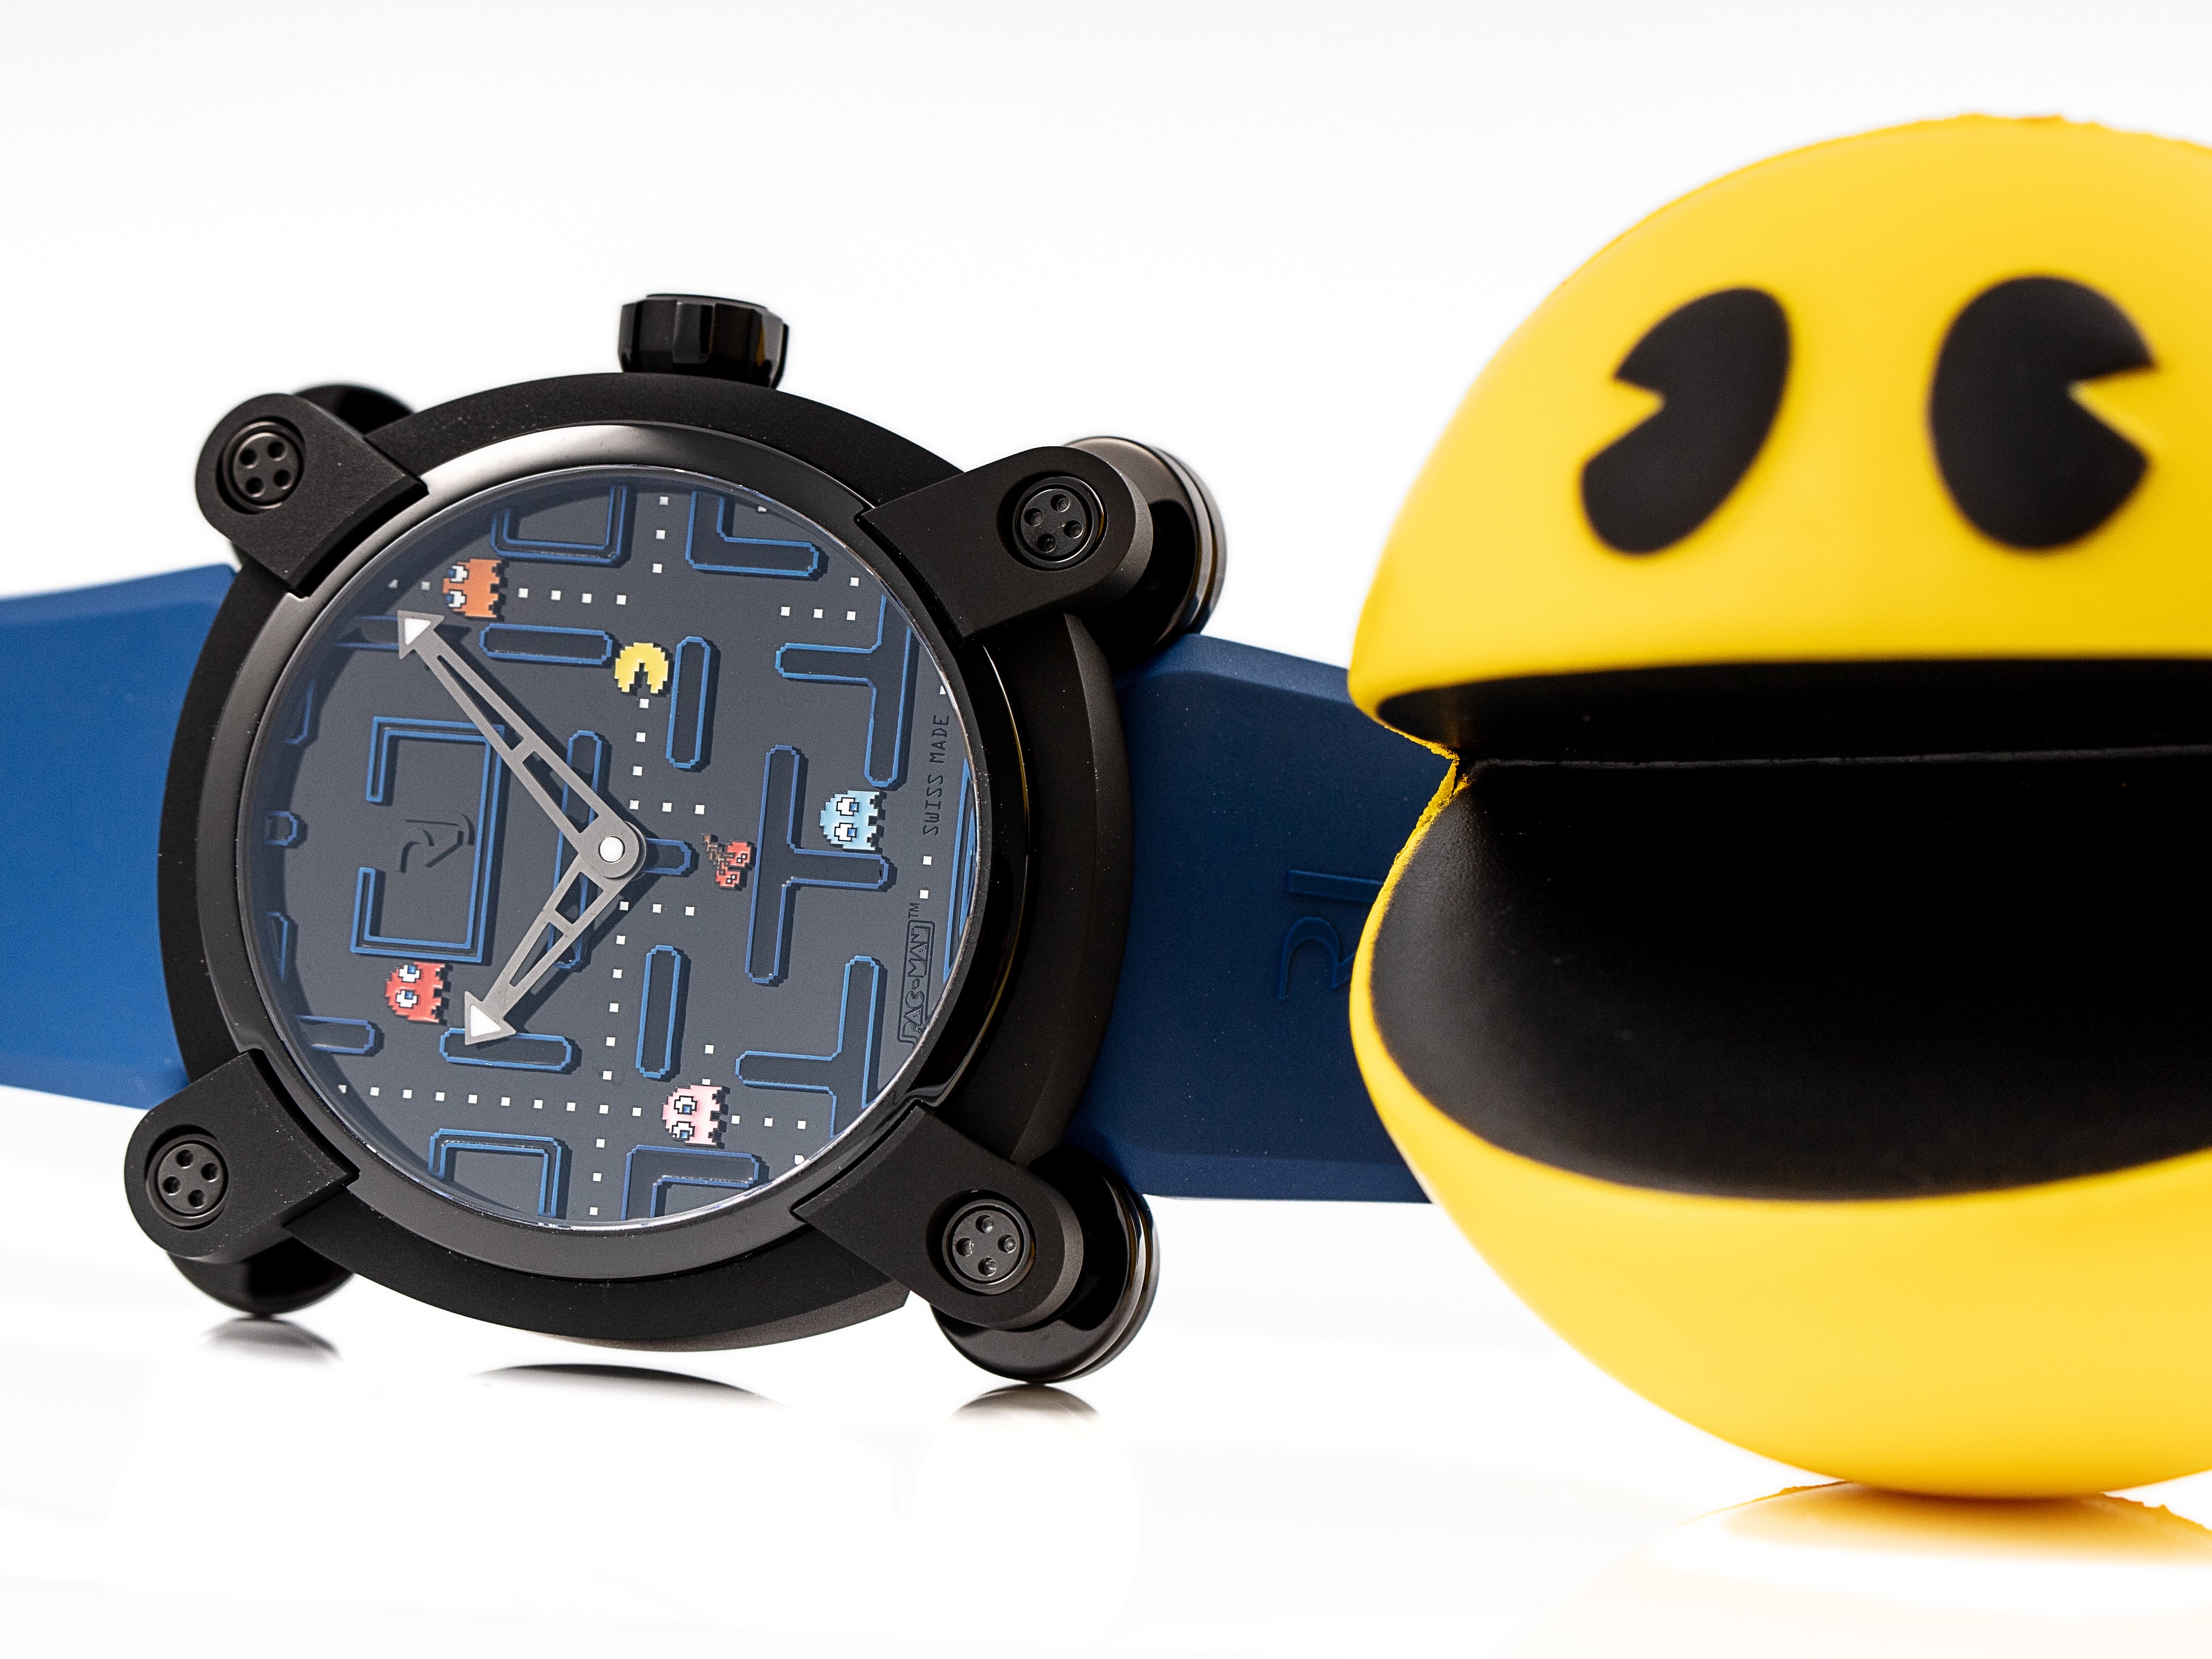 Swiss watchmaker RJ has created the limited-edition PAC-MAN™ Level III timepiece in collaborated with Japanese video game company Bandai Namco Entertainment.